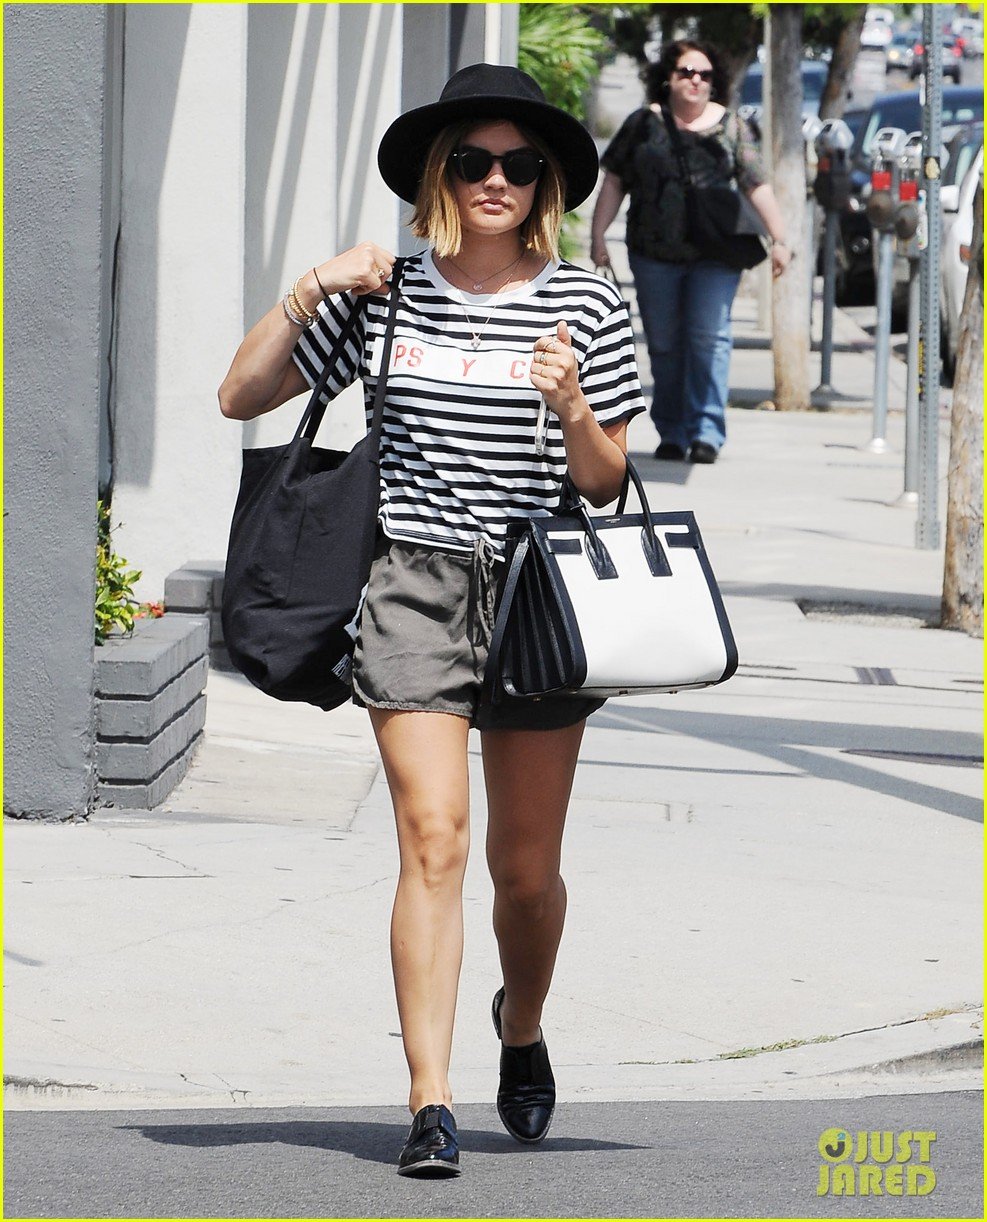 Lucy Hale Goes Shopping After Returning Home From Hawaiian Vacation ...